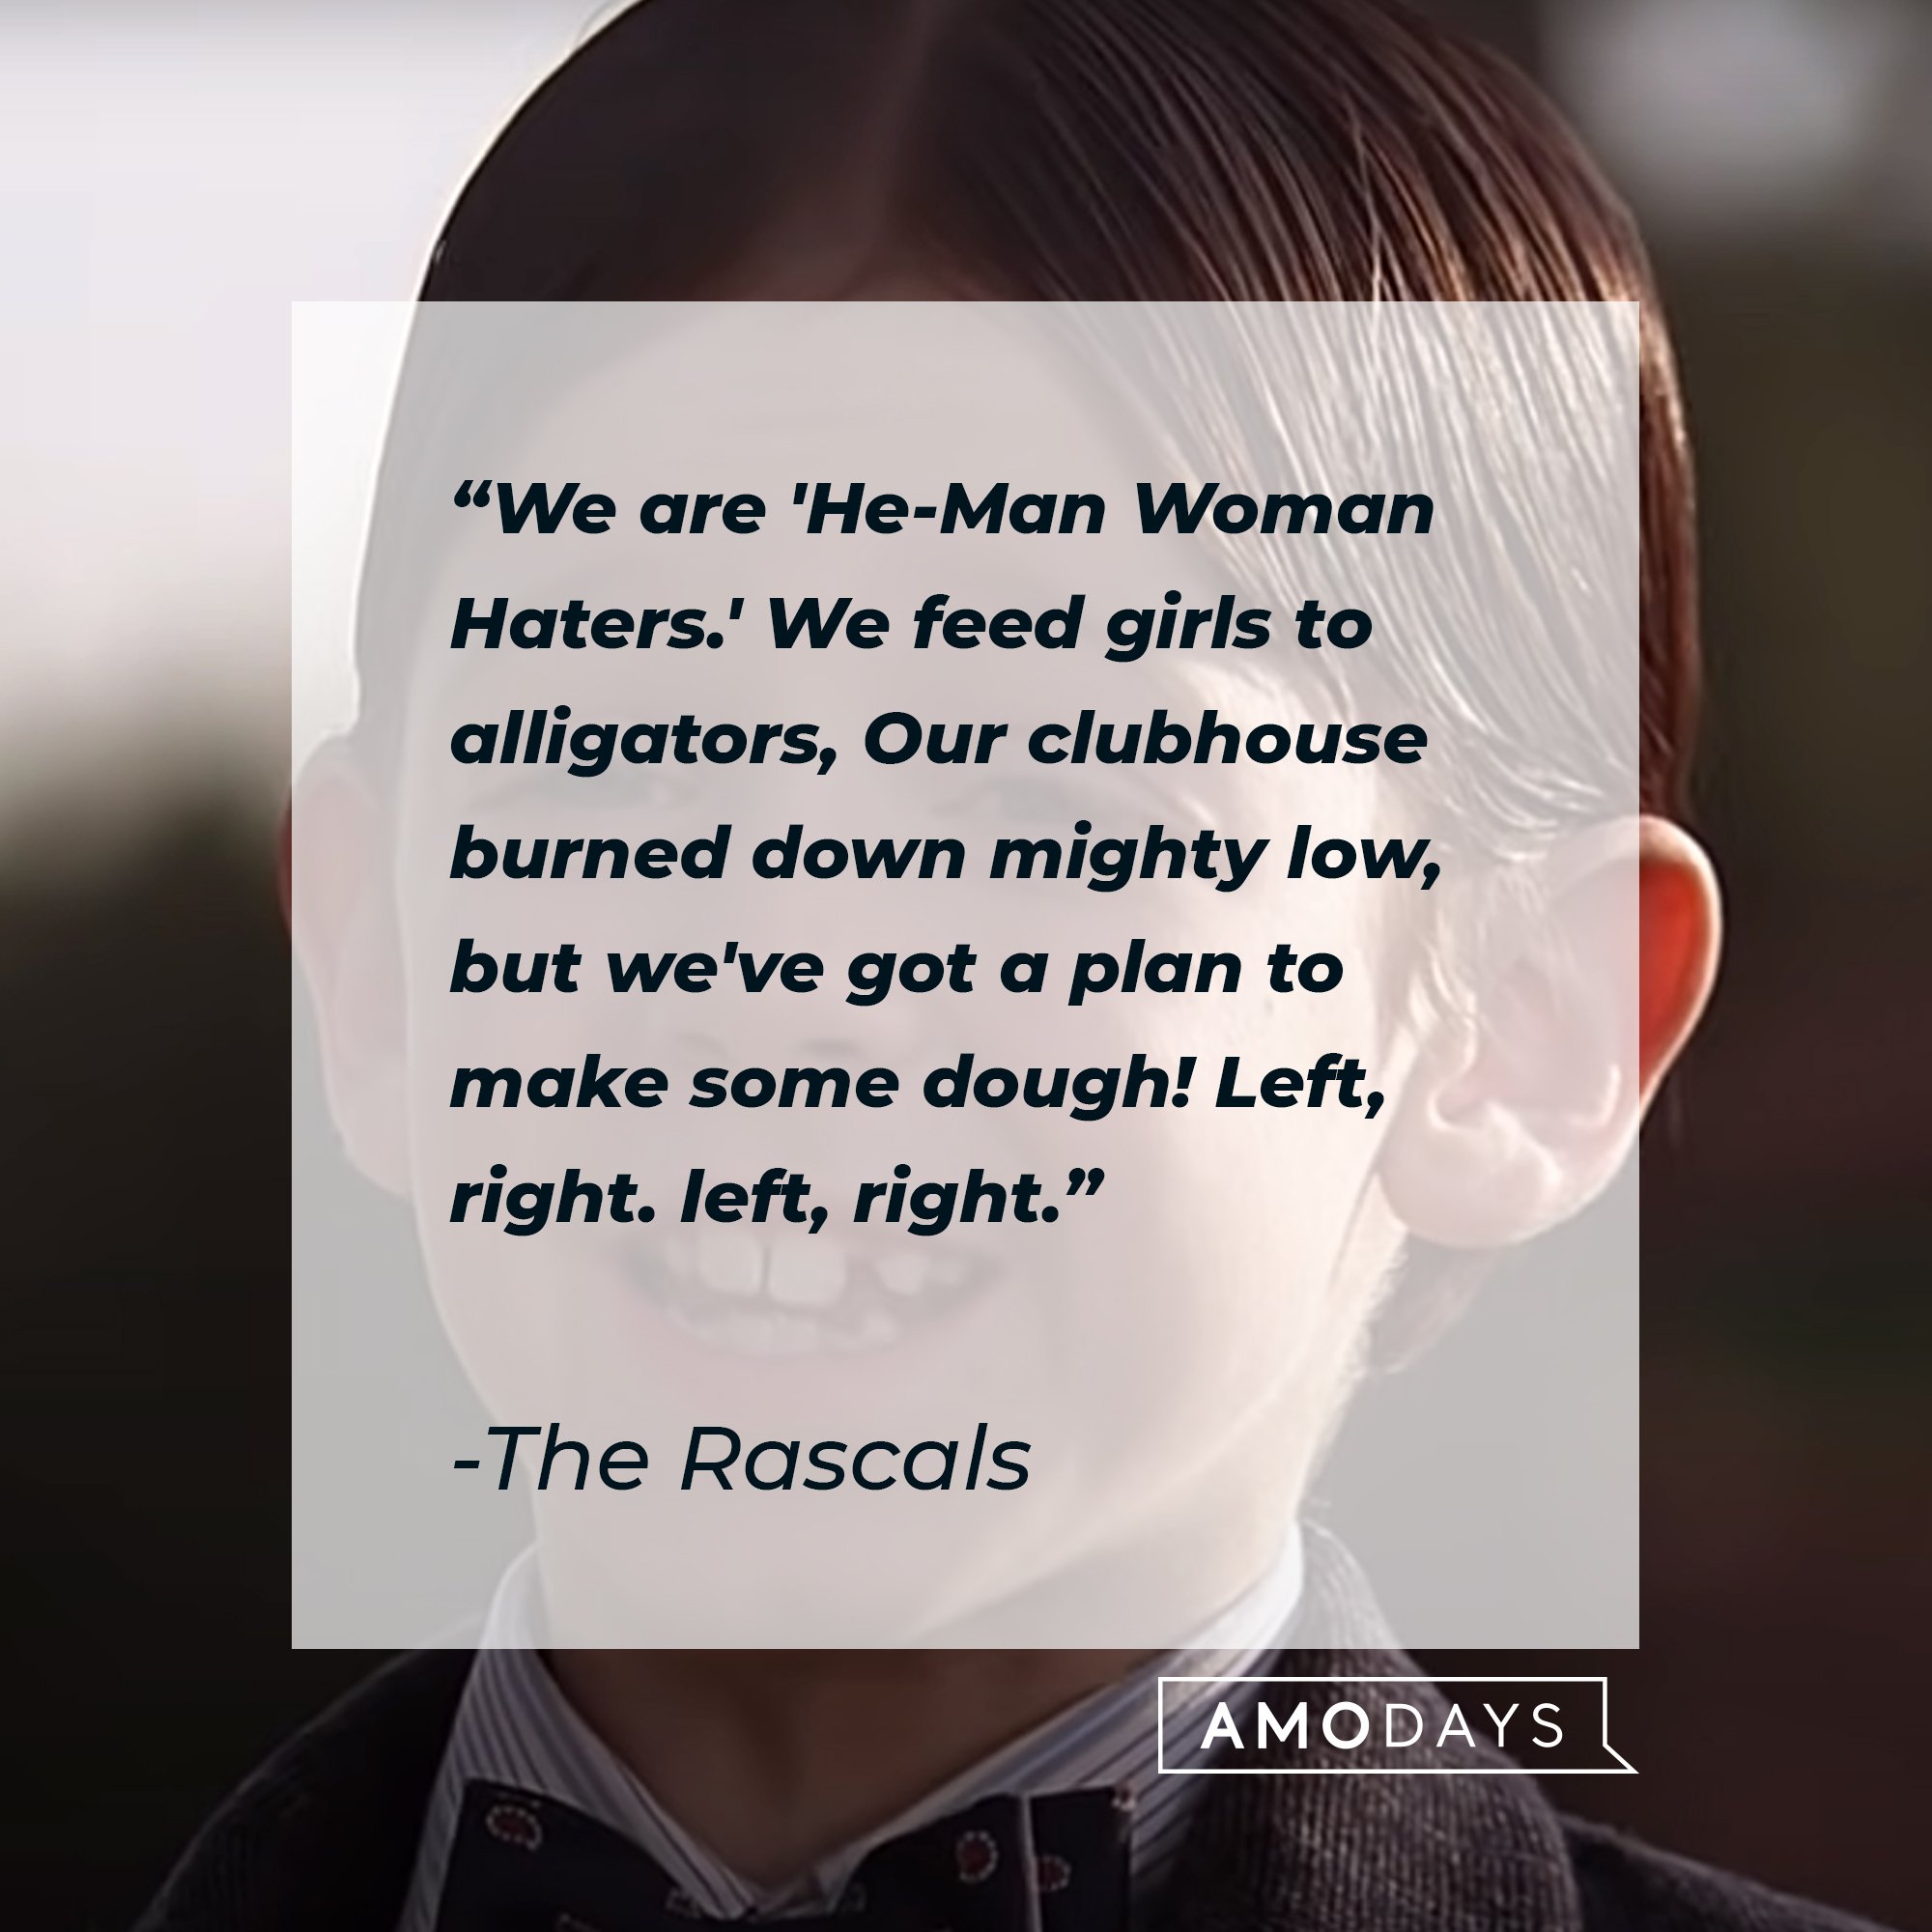 The Rascals’ quote: "We are 'He-Man Woman Haters.' We feed girls to alligators, Our clubhouse burned down mighty low, but we've got a plan to make some dough! Left, right. left, right." | Image: AmoDays